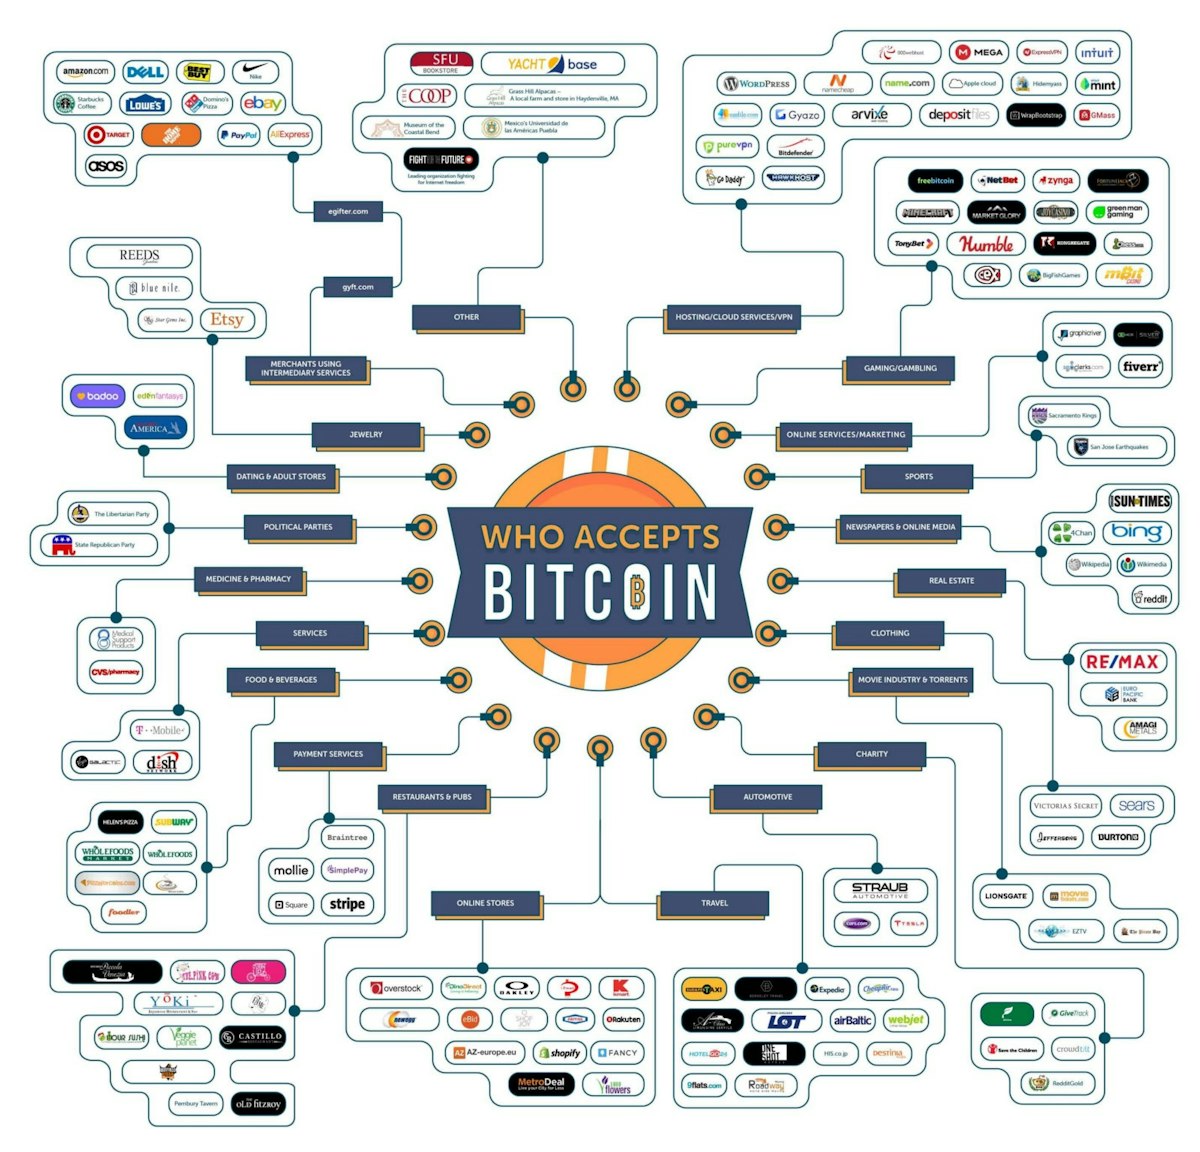 featured image - Who accepts Bitcoin?